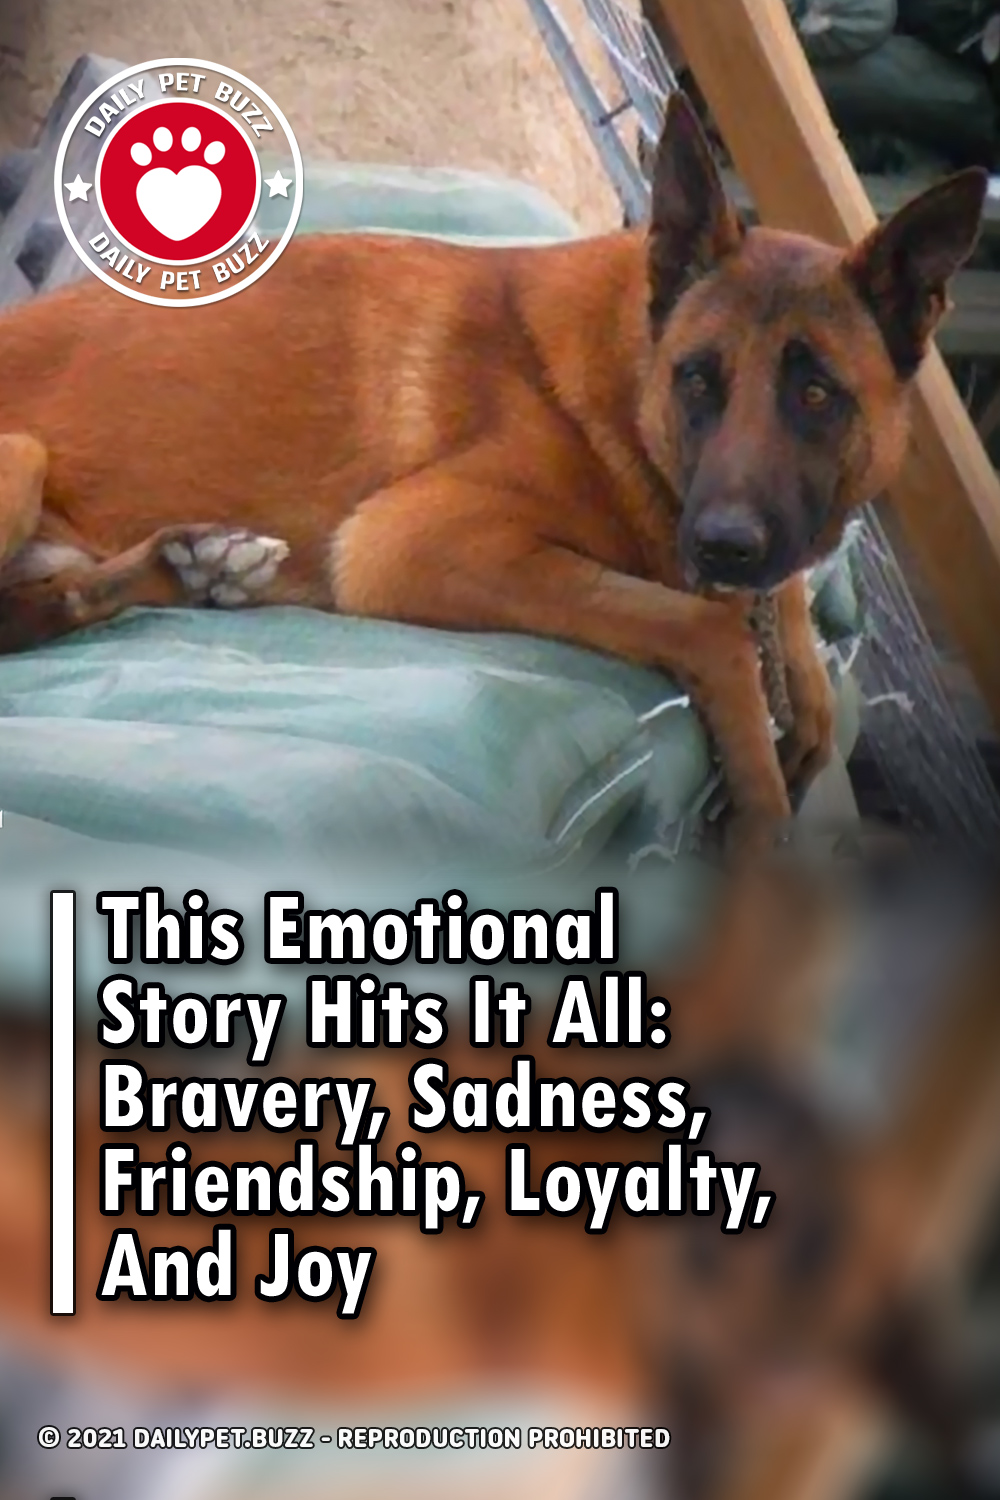 This Emotional Story Hits It All: Bravery, Sadness, Friendship, Loyalty, And Joy